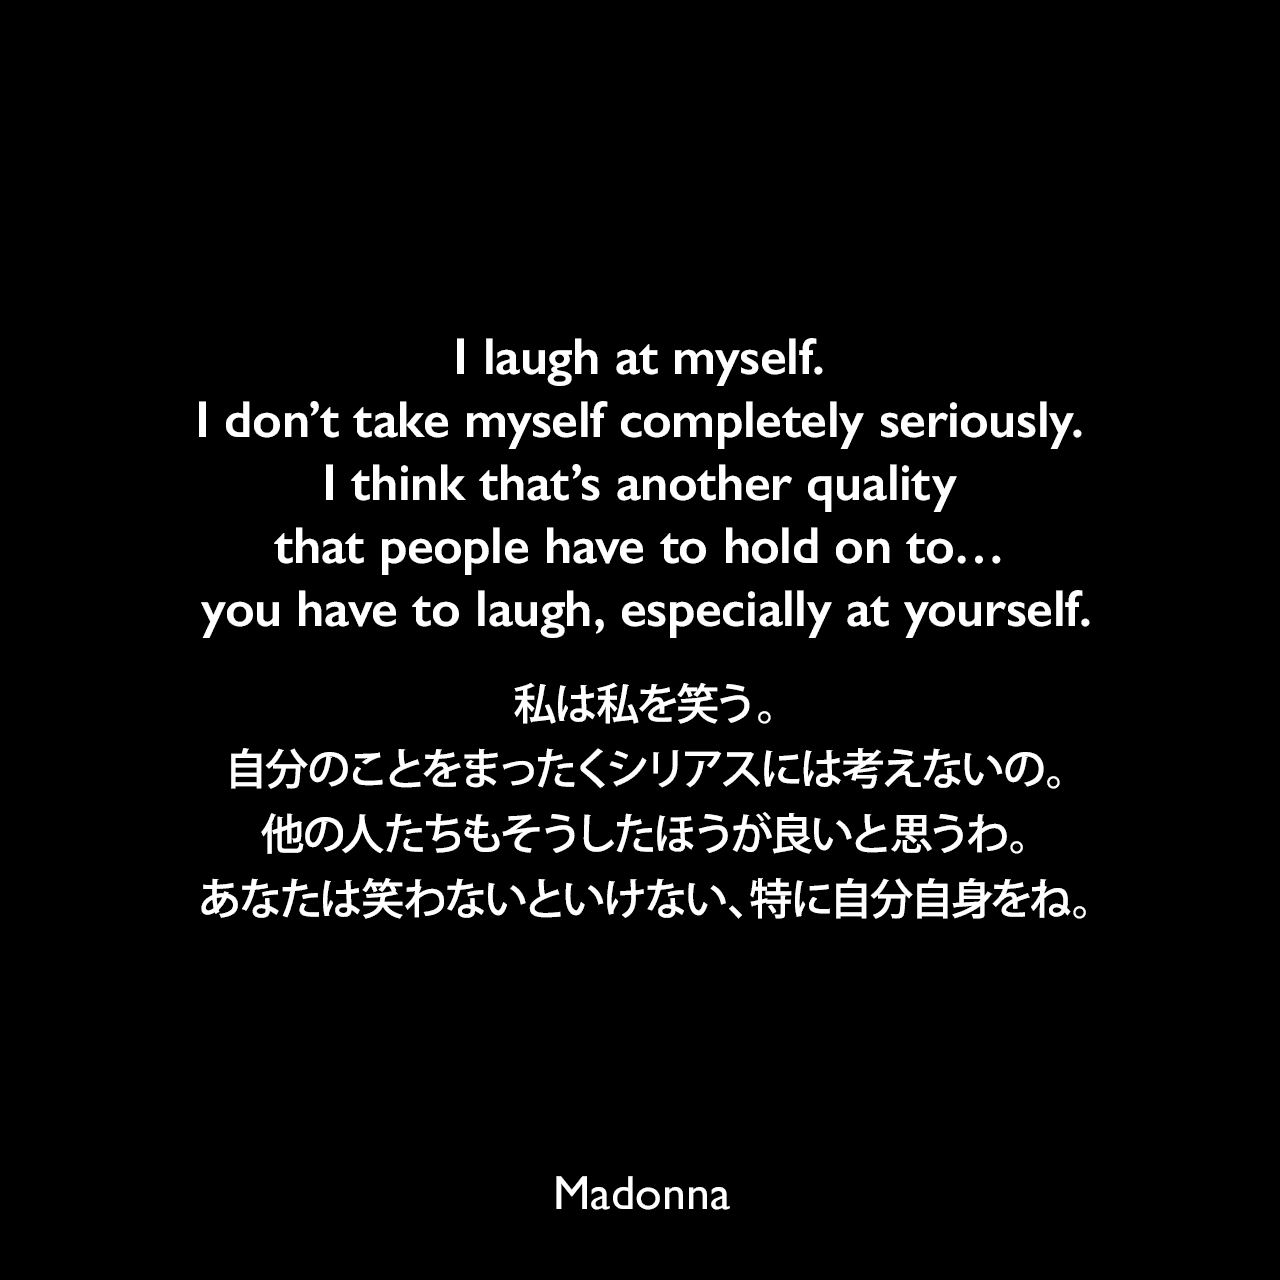 I laugh at myself. I don’t take myself completely seriously. I think that’s another quality that people have to hold on to… you have to laugh, especially at yourself.私は私を笑う。自分のことをまったくシリアスには考えないの。他の人たちもそうしたほうが良いと思うわ。あなたは笑わないといけない、特に自分自身をね。Madonna